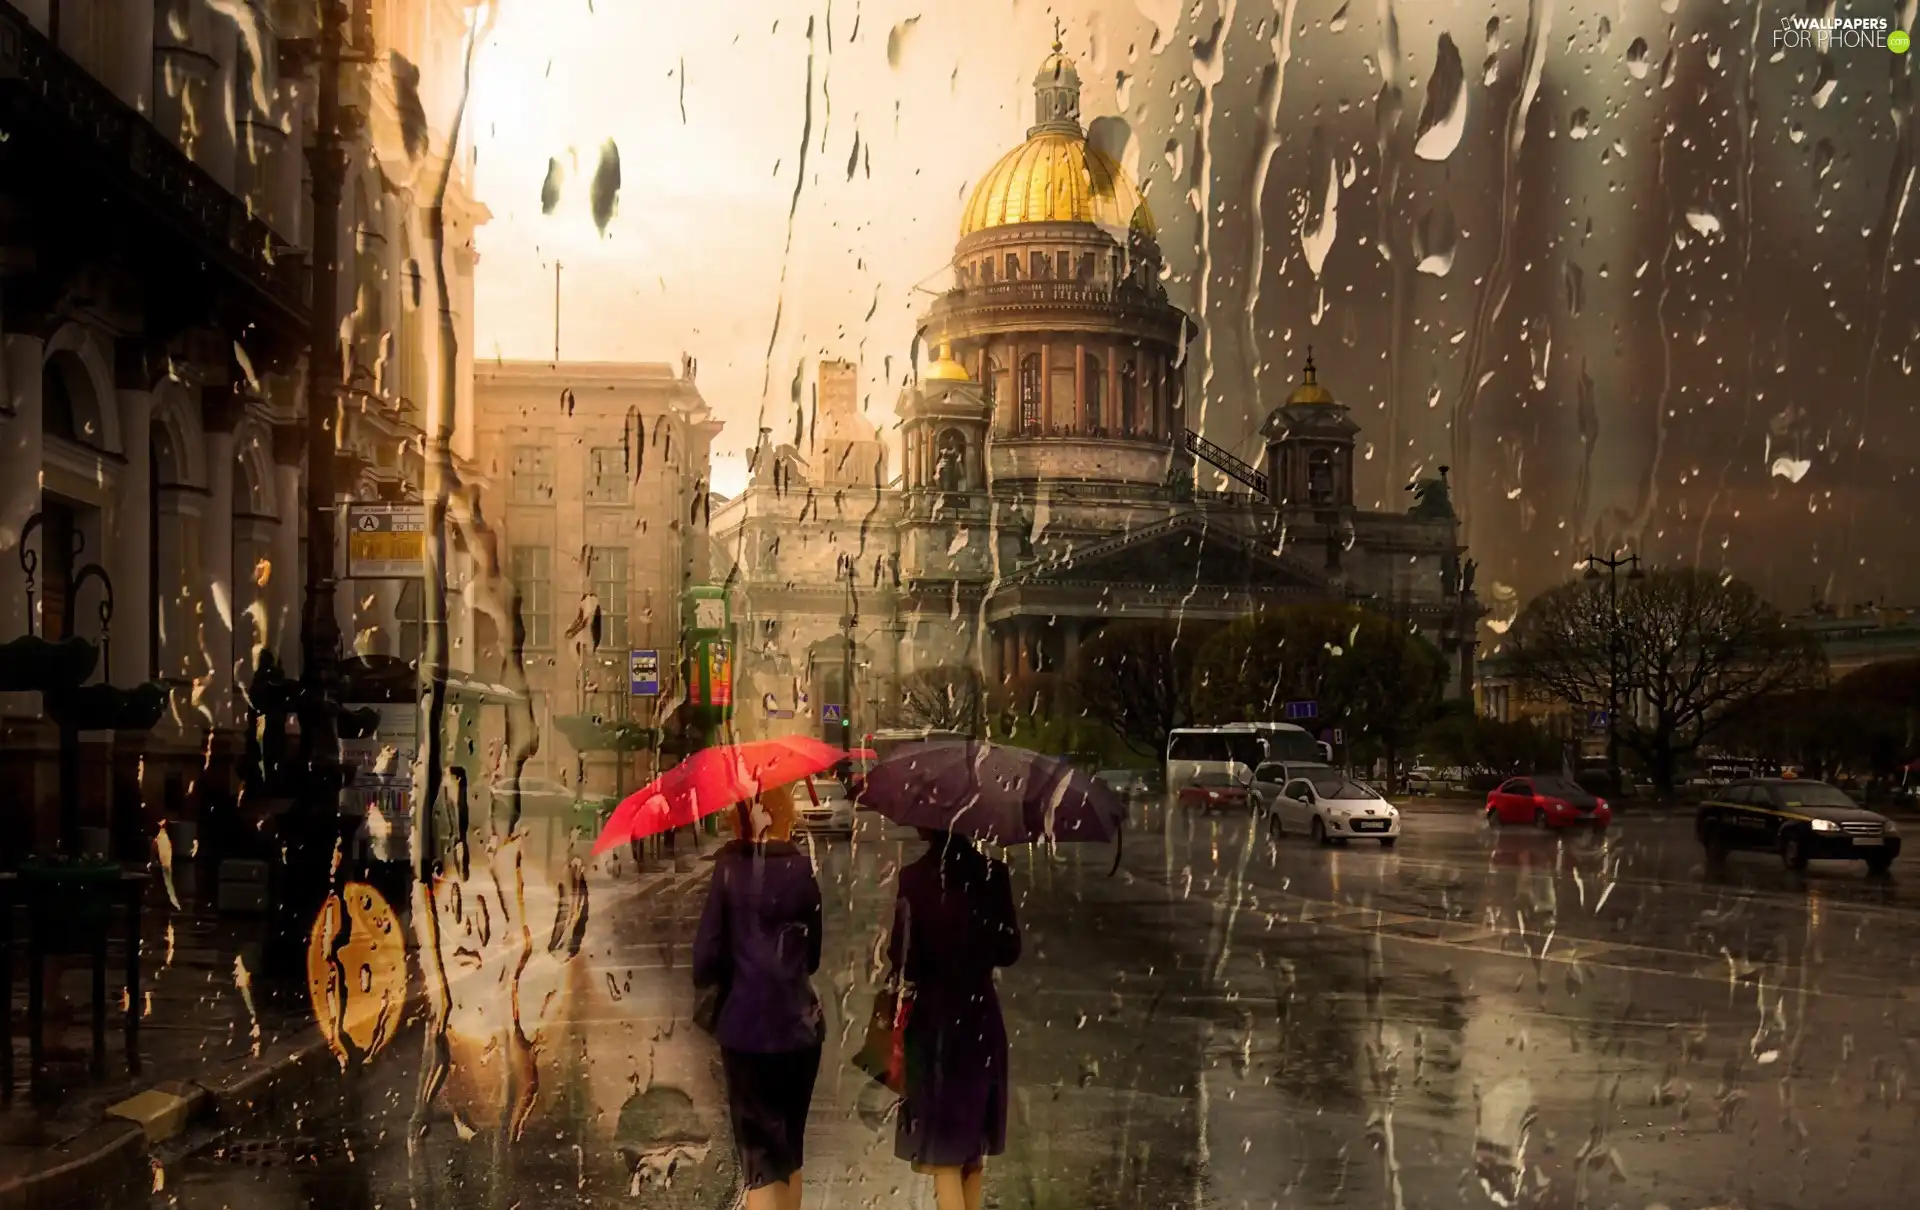 Rain, buildings, Picture of Town, Street